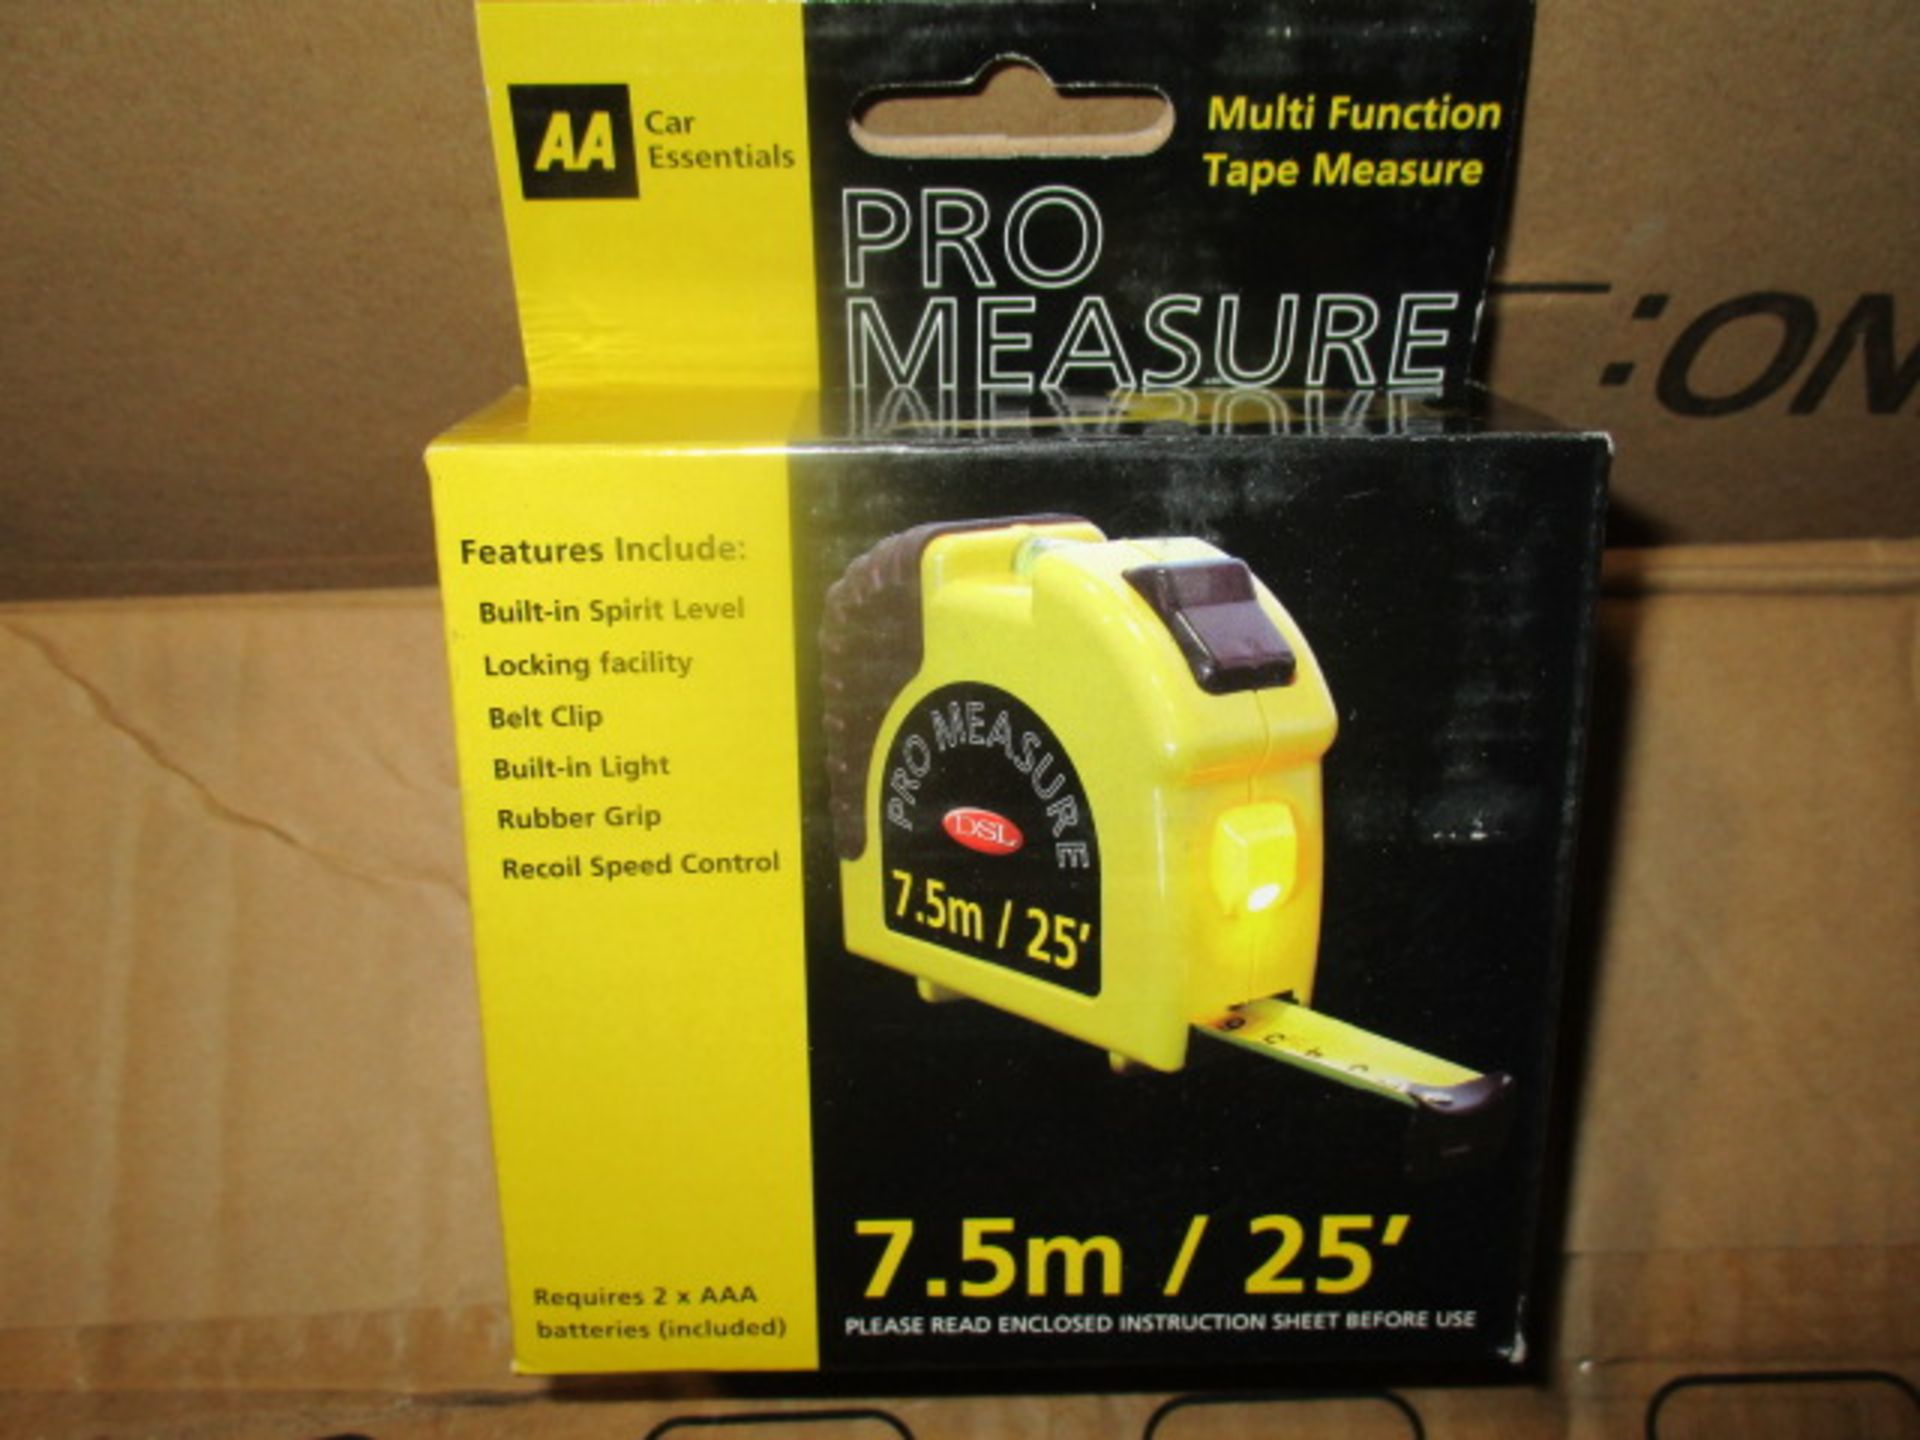 10pcs in lot brand new AA pro tape measure with accessories - spirit level , light , belt clip ,